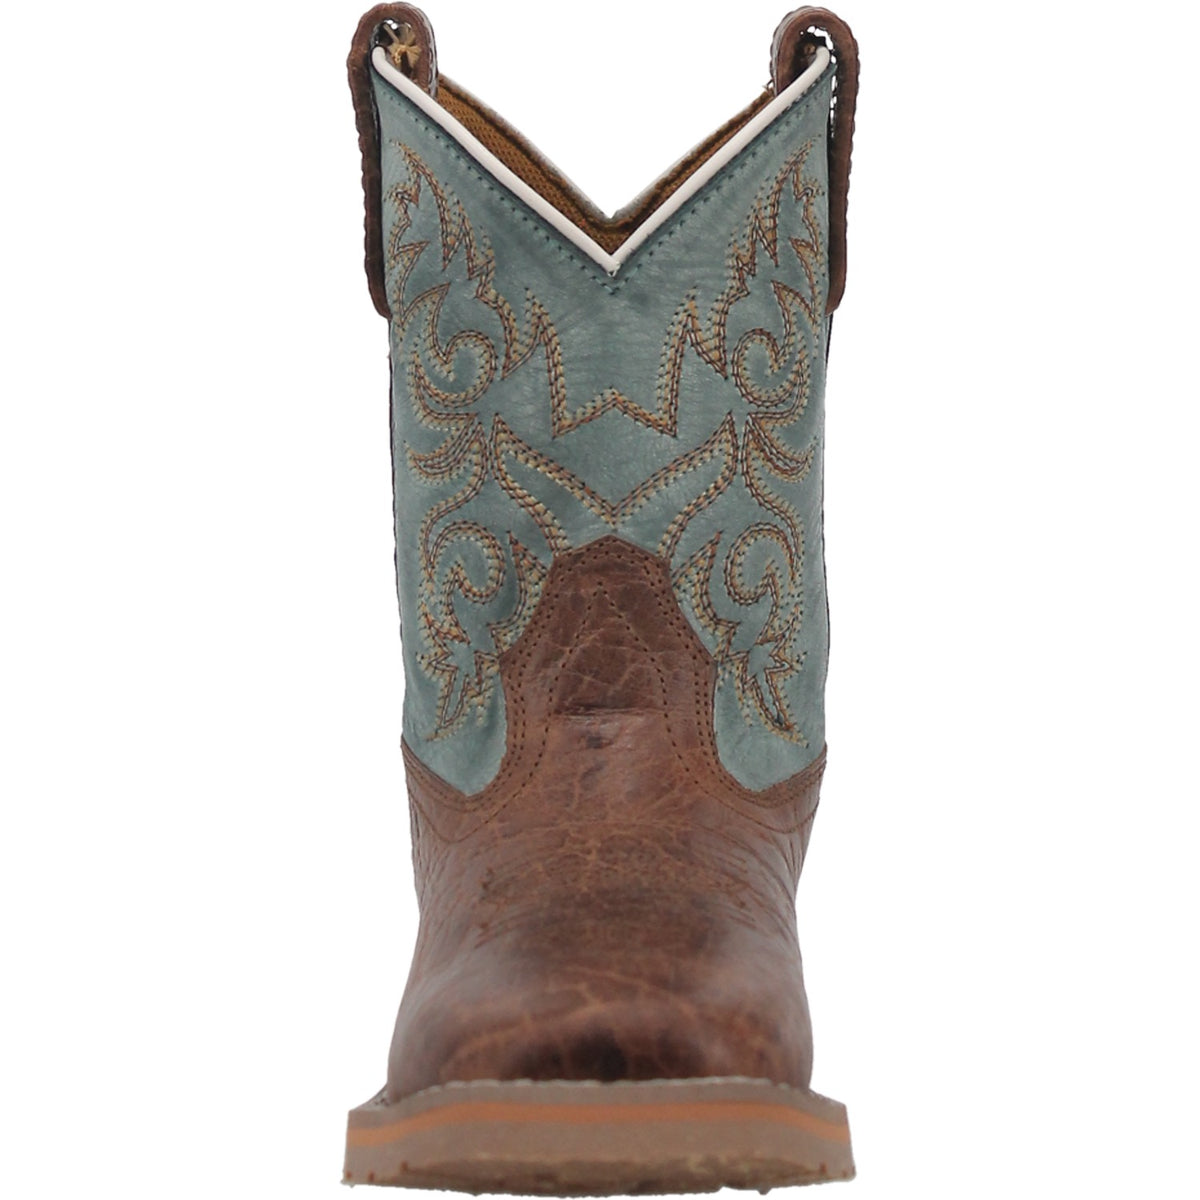 LIL' BISBEE LEATHER CHILDREN'S BOOT Cover